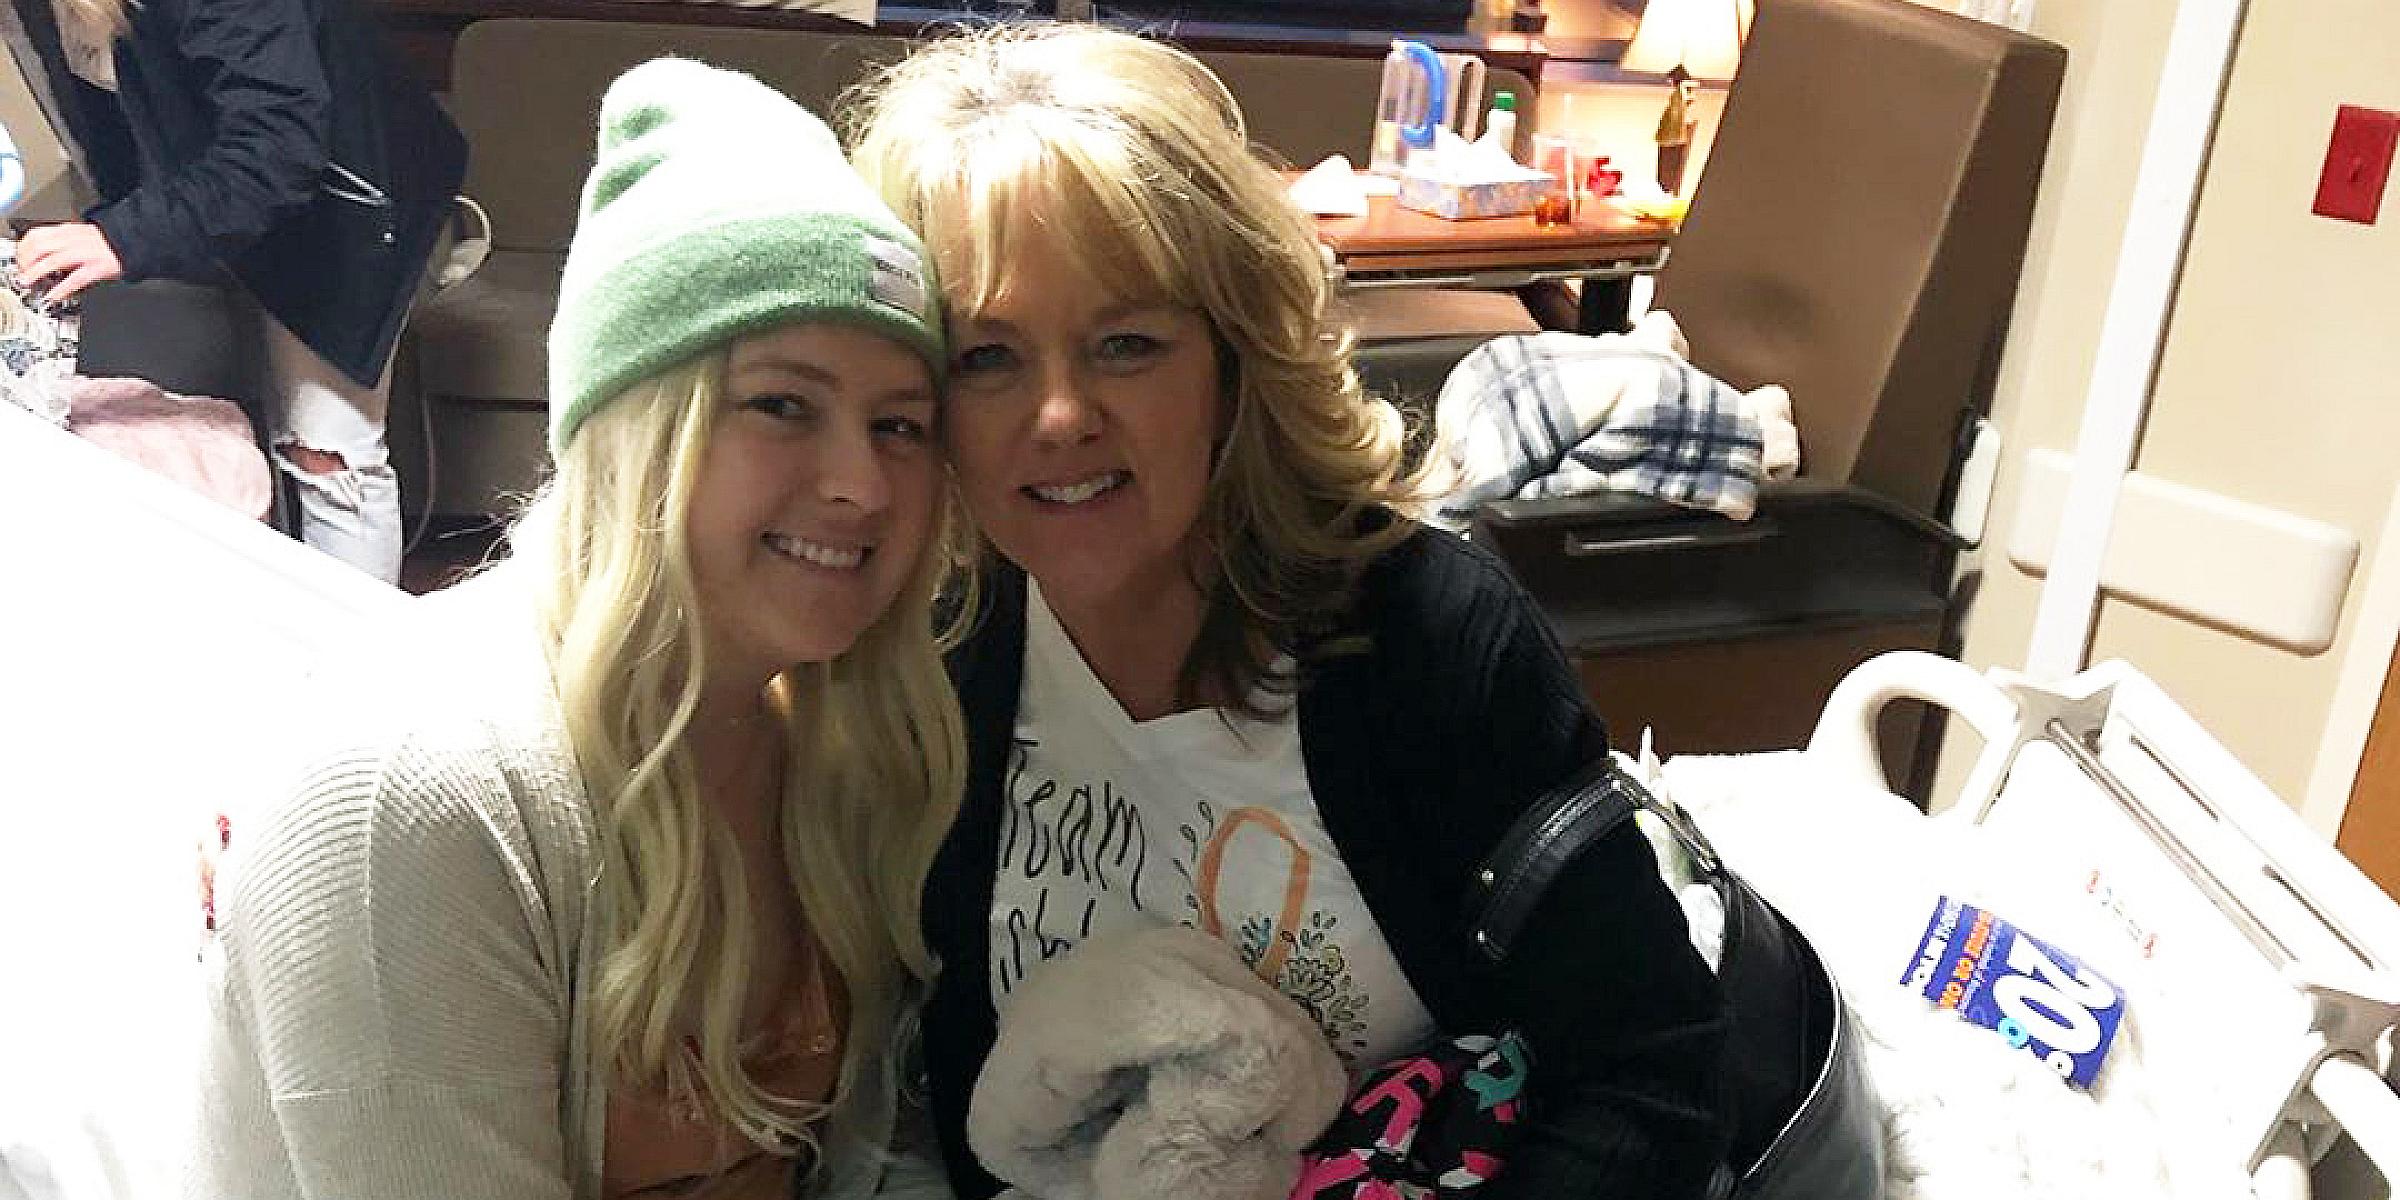 Kelli with her daughter Ashley